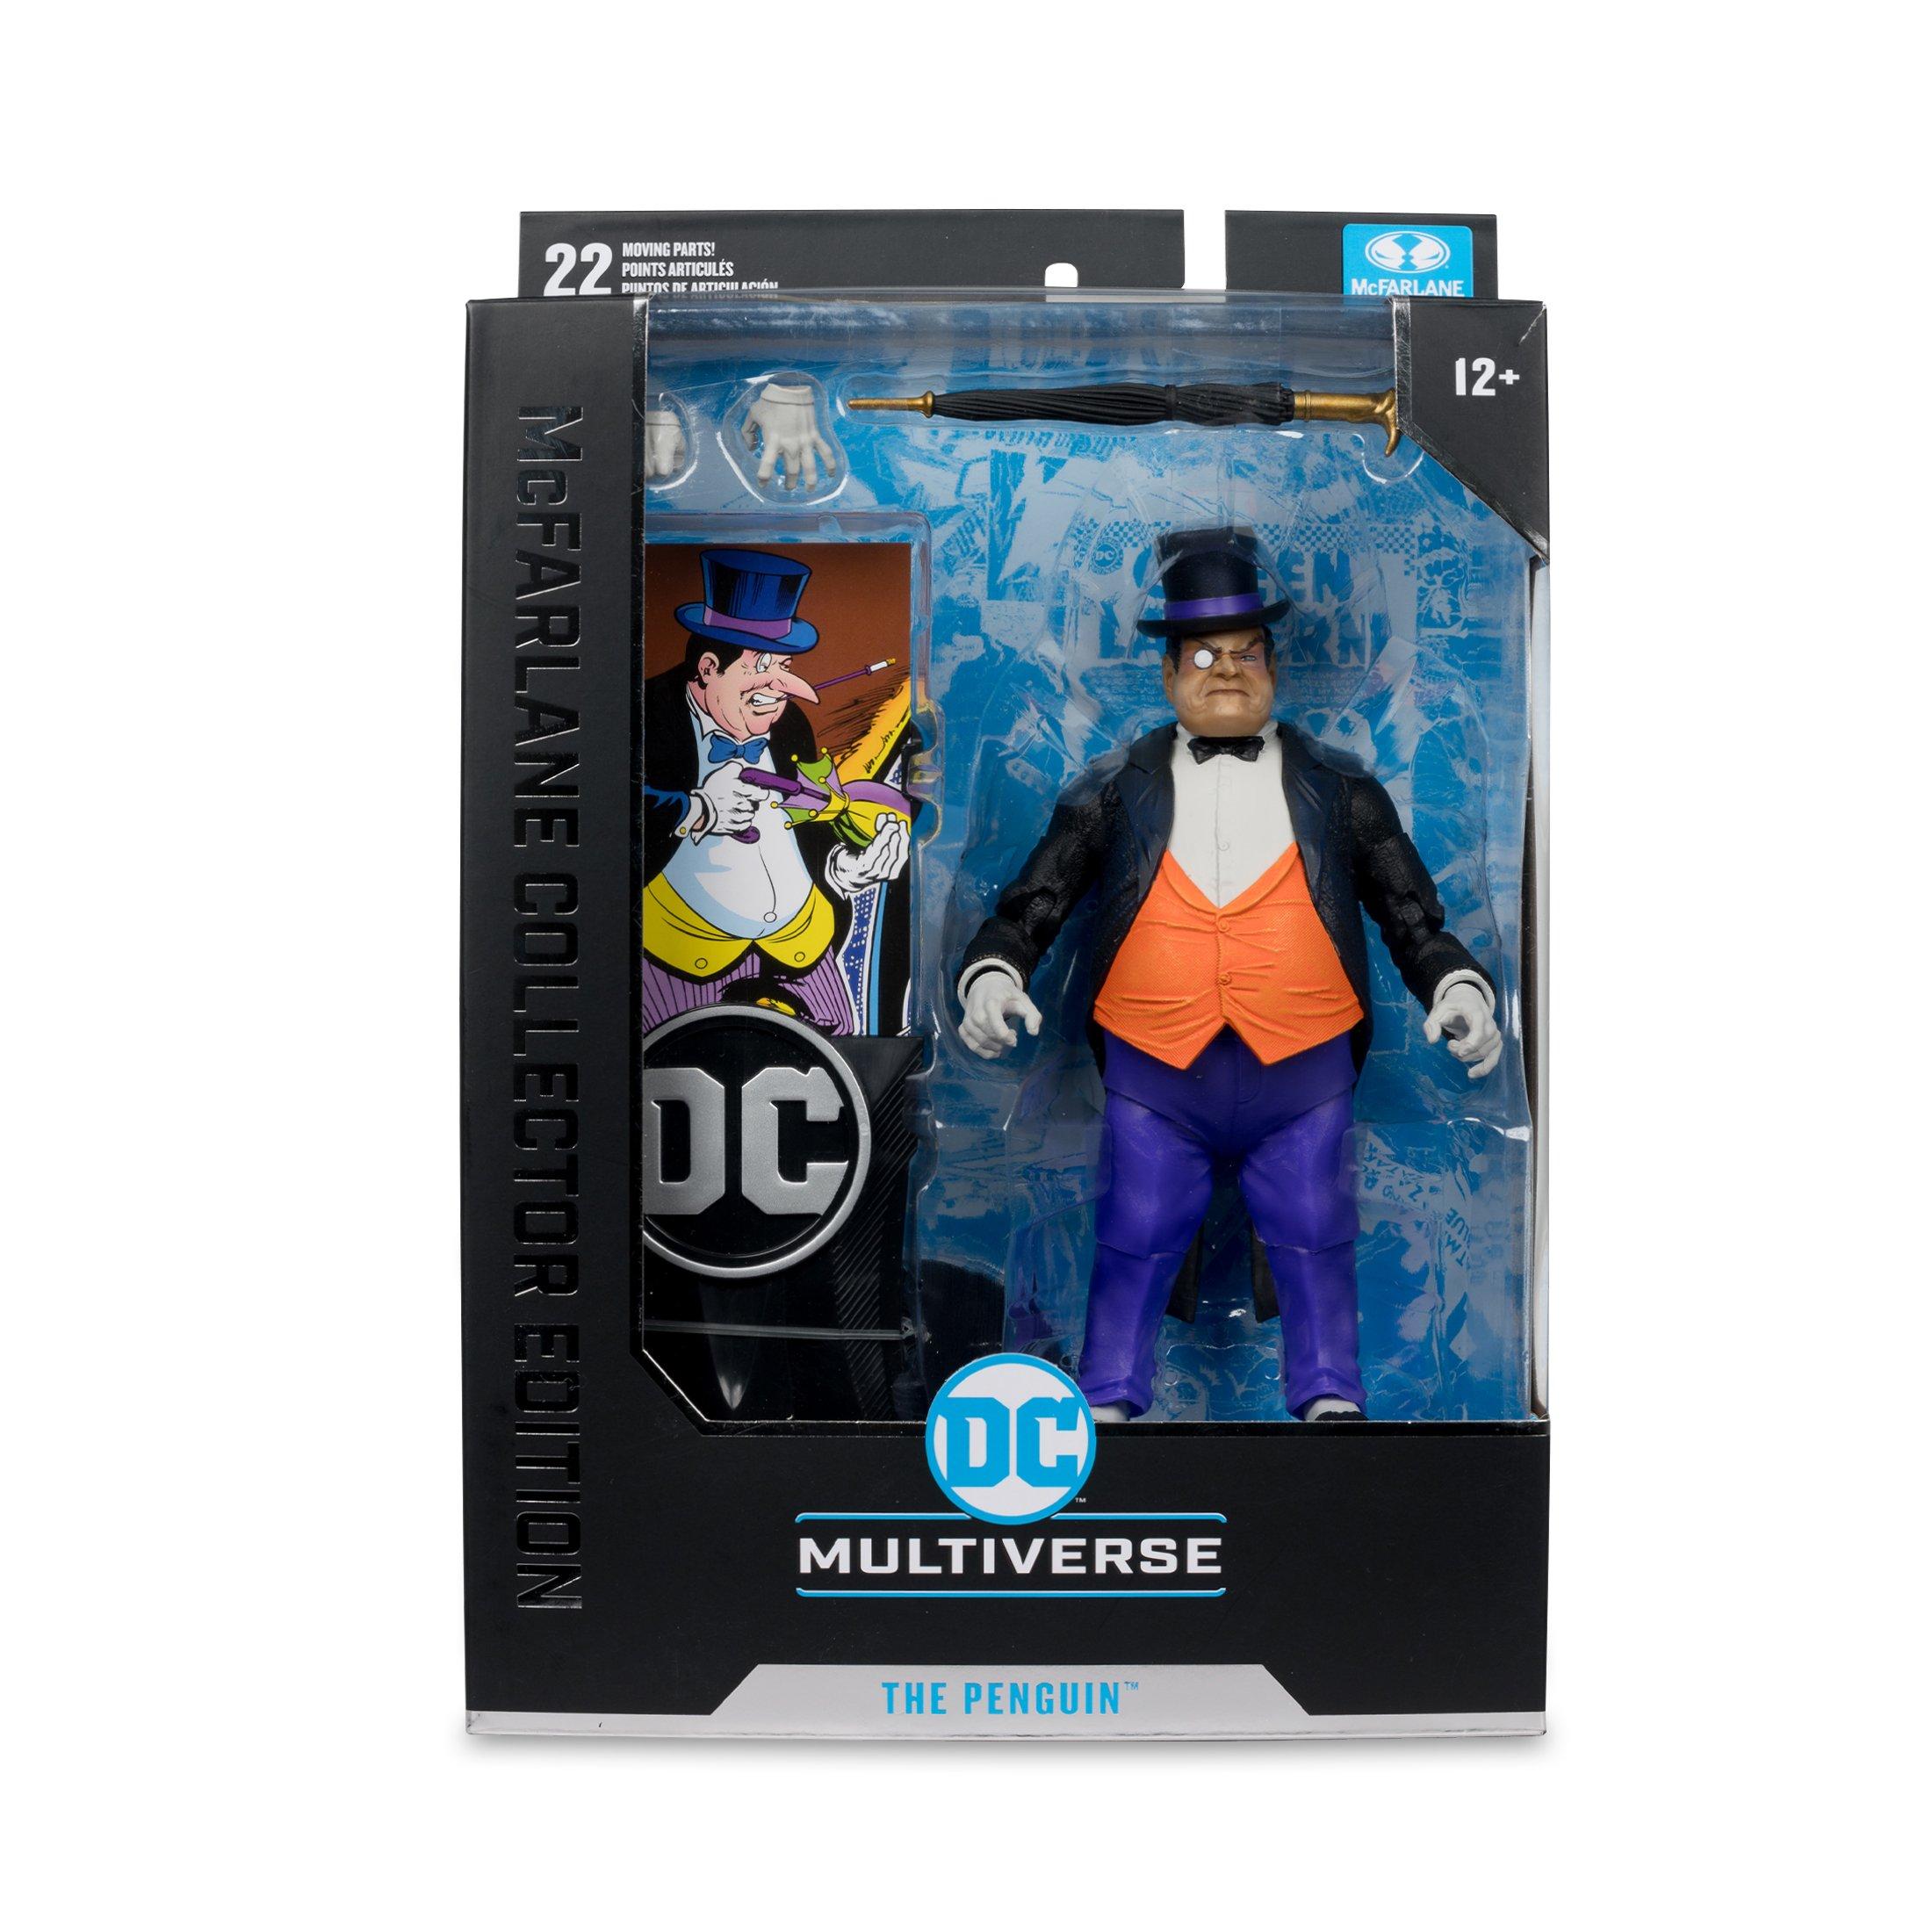 McFarlane Toys DC Multiverse The Penguin 7-in Action Figure | GameStop